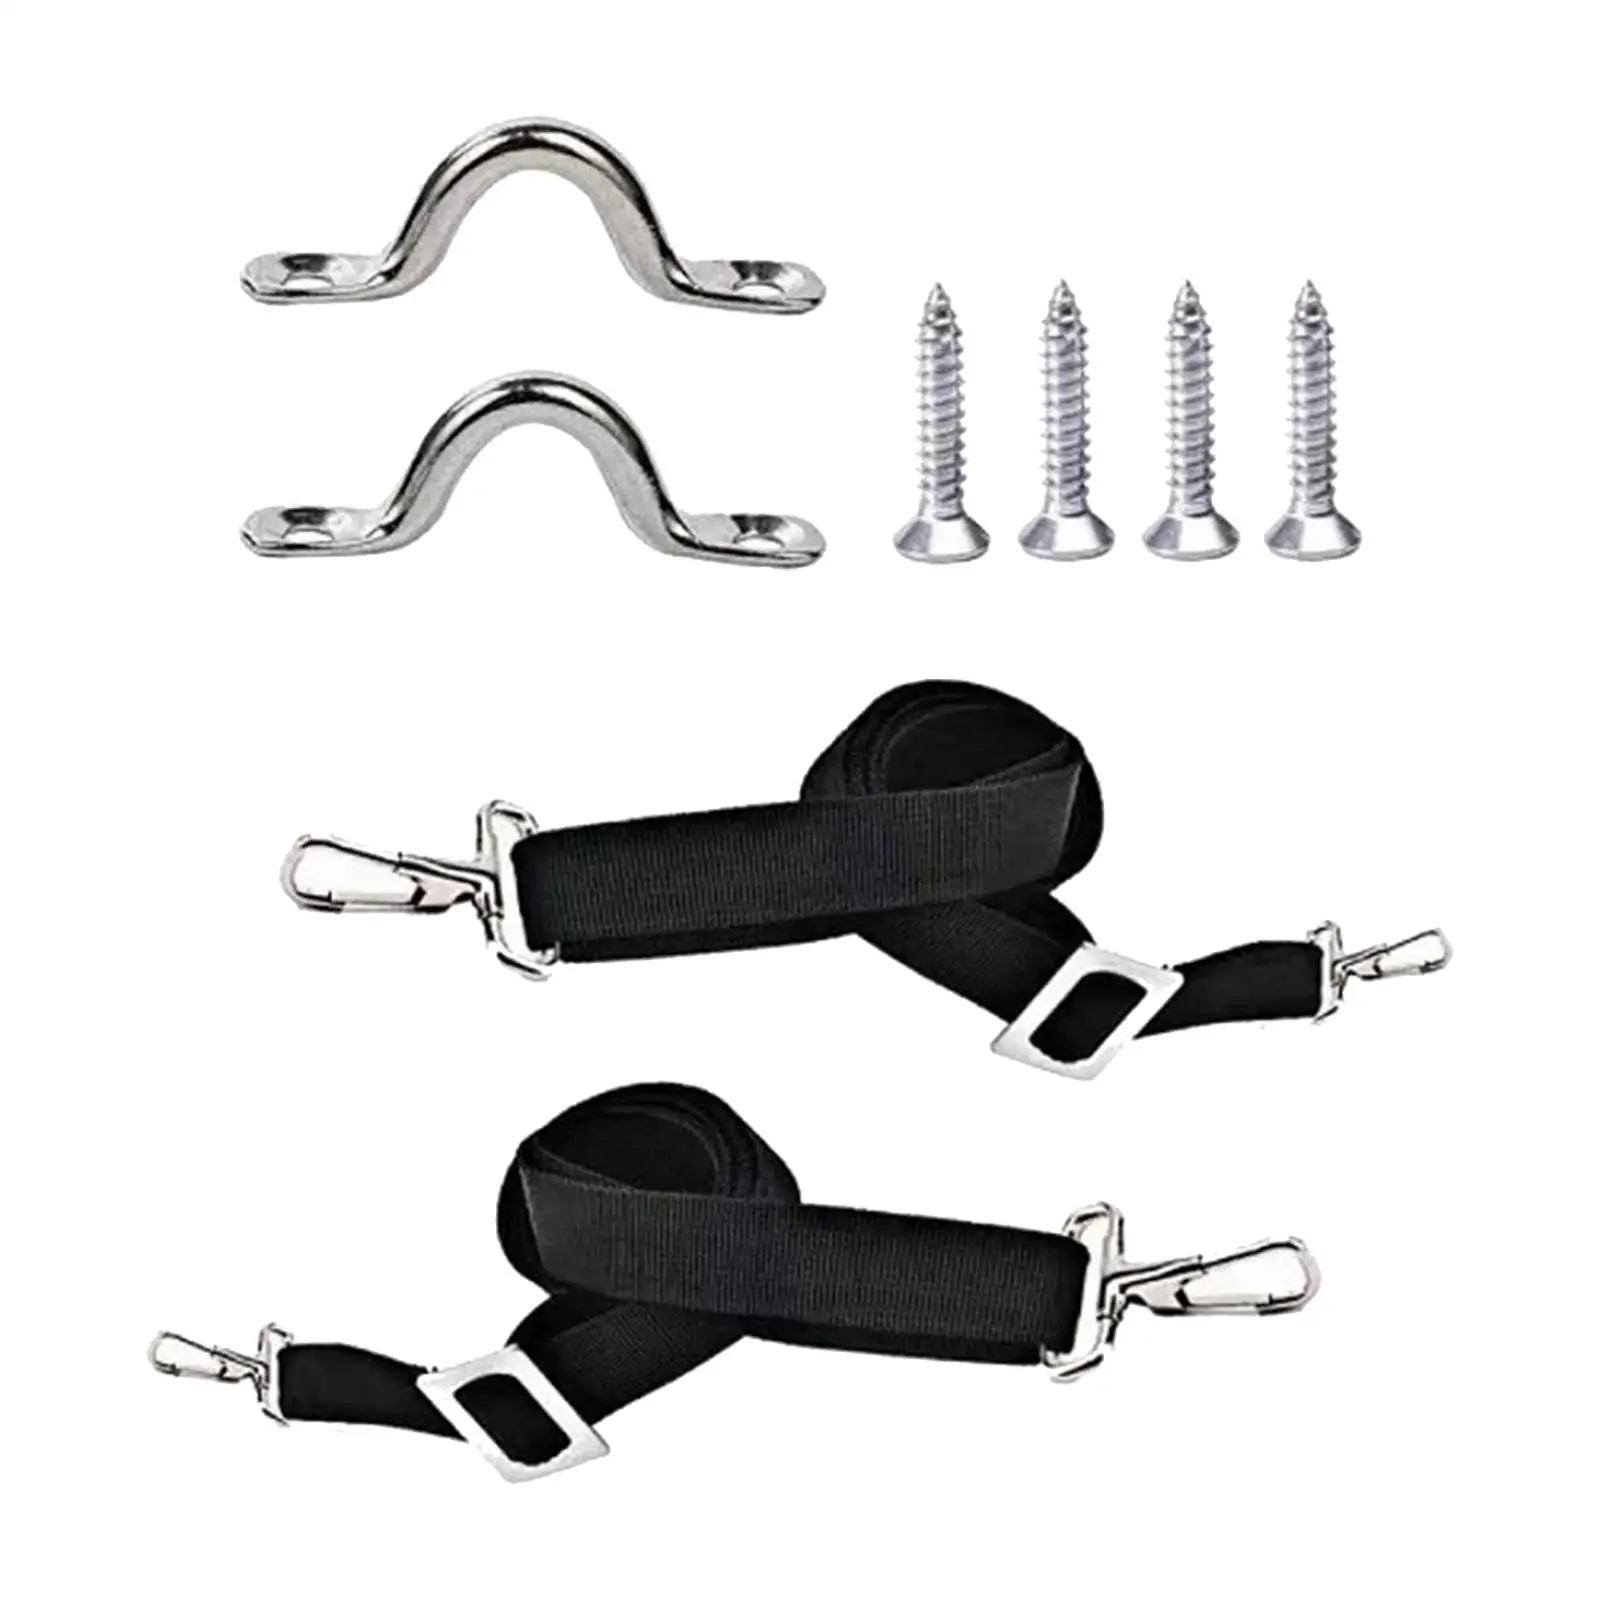 2x Adjustable Bimini Top Straps with Loop Snap Hooks Pad Eye Straps Tie Down Webbing Straps Bimini Awning Straps for Canoe